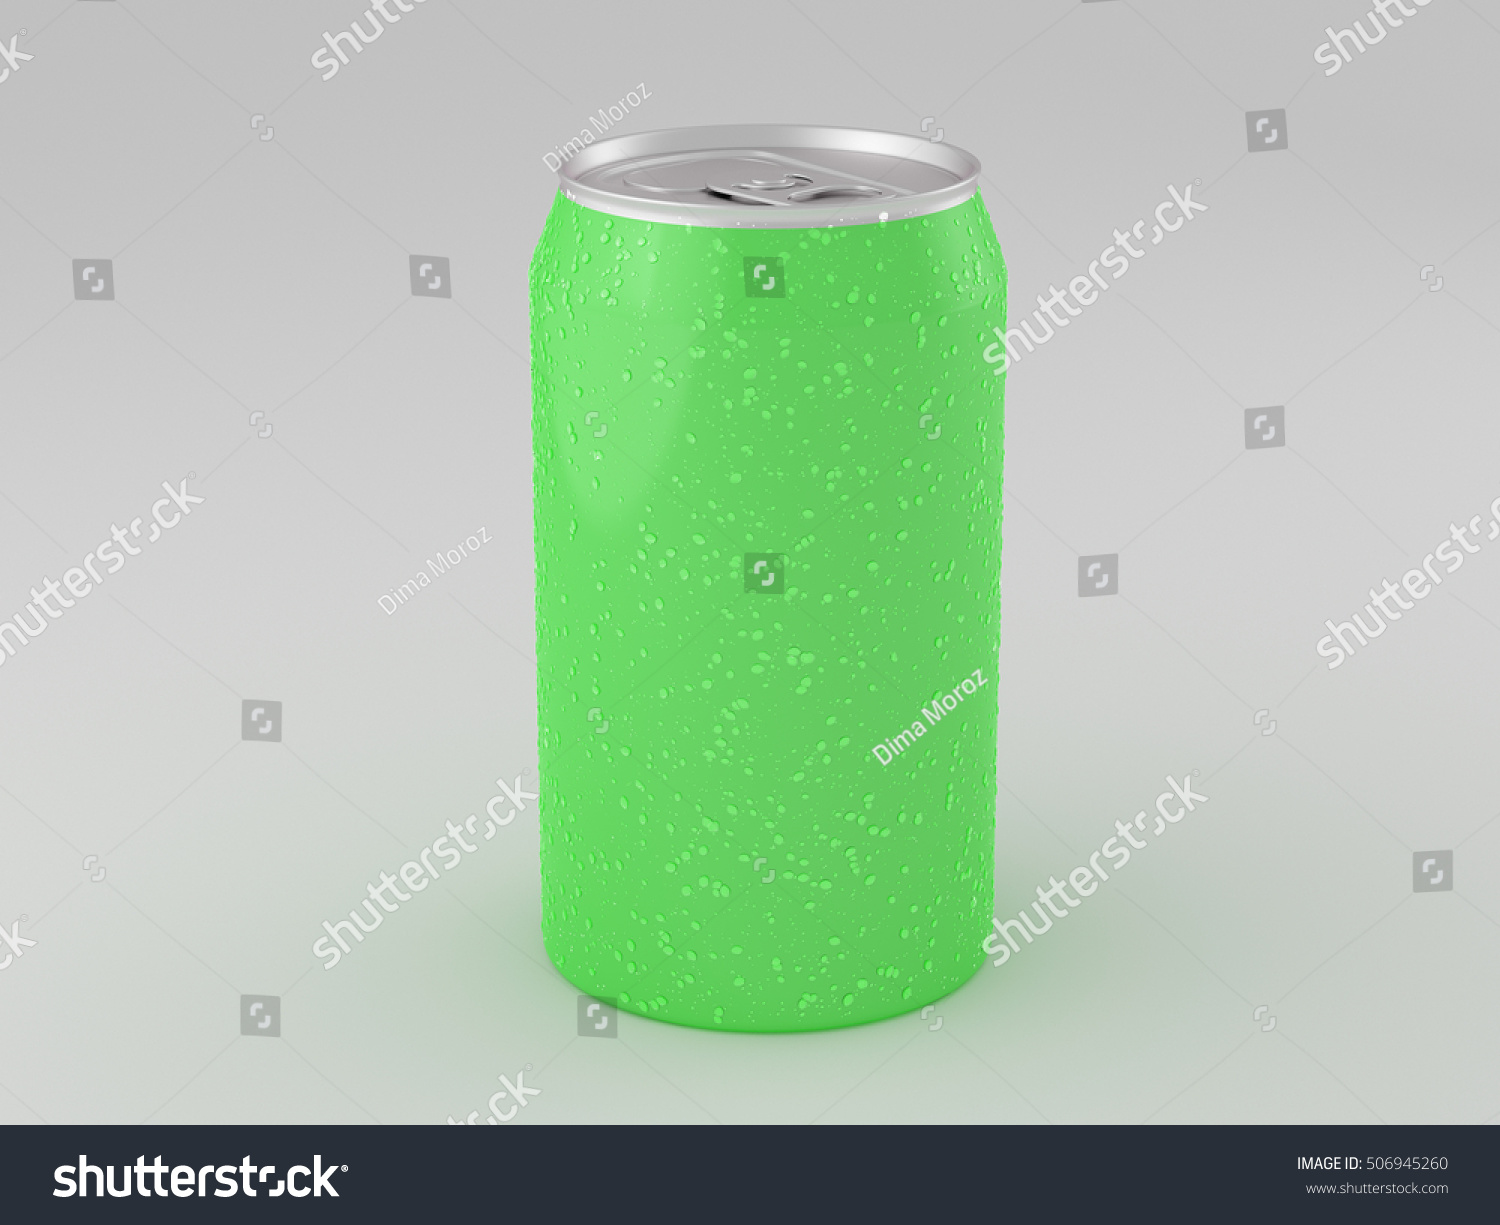 Download Green Aluminum Can Mockup Condensation Drops Stock Illustration 506945260 Yellowimages Mockups